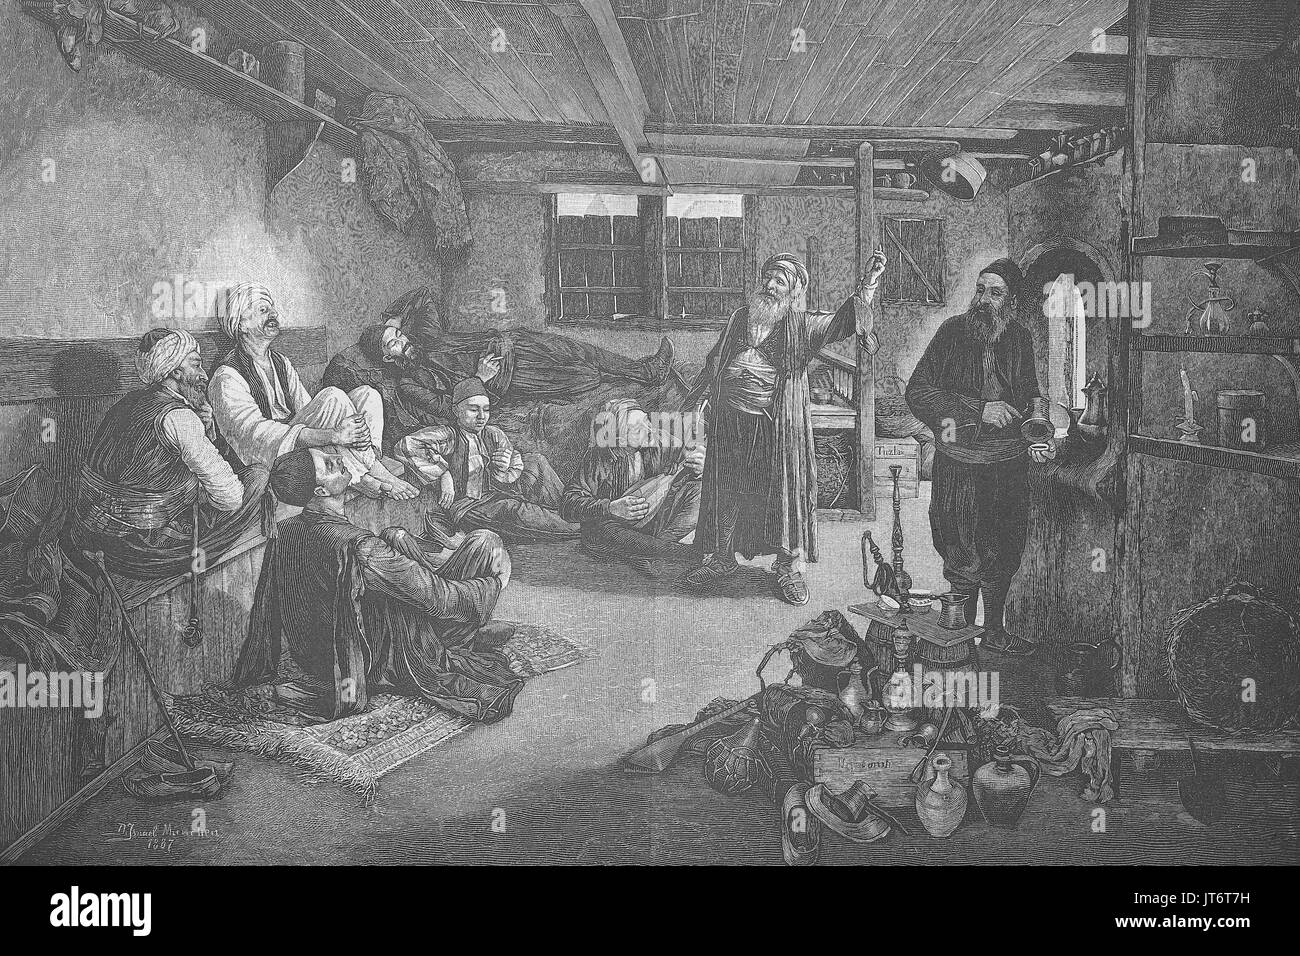 A cafe in Bosnia, native people sitting and relaxing, Digital improved reproduction of an image published between 1880 - 1885 Stock Photo